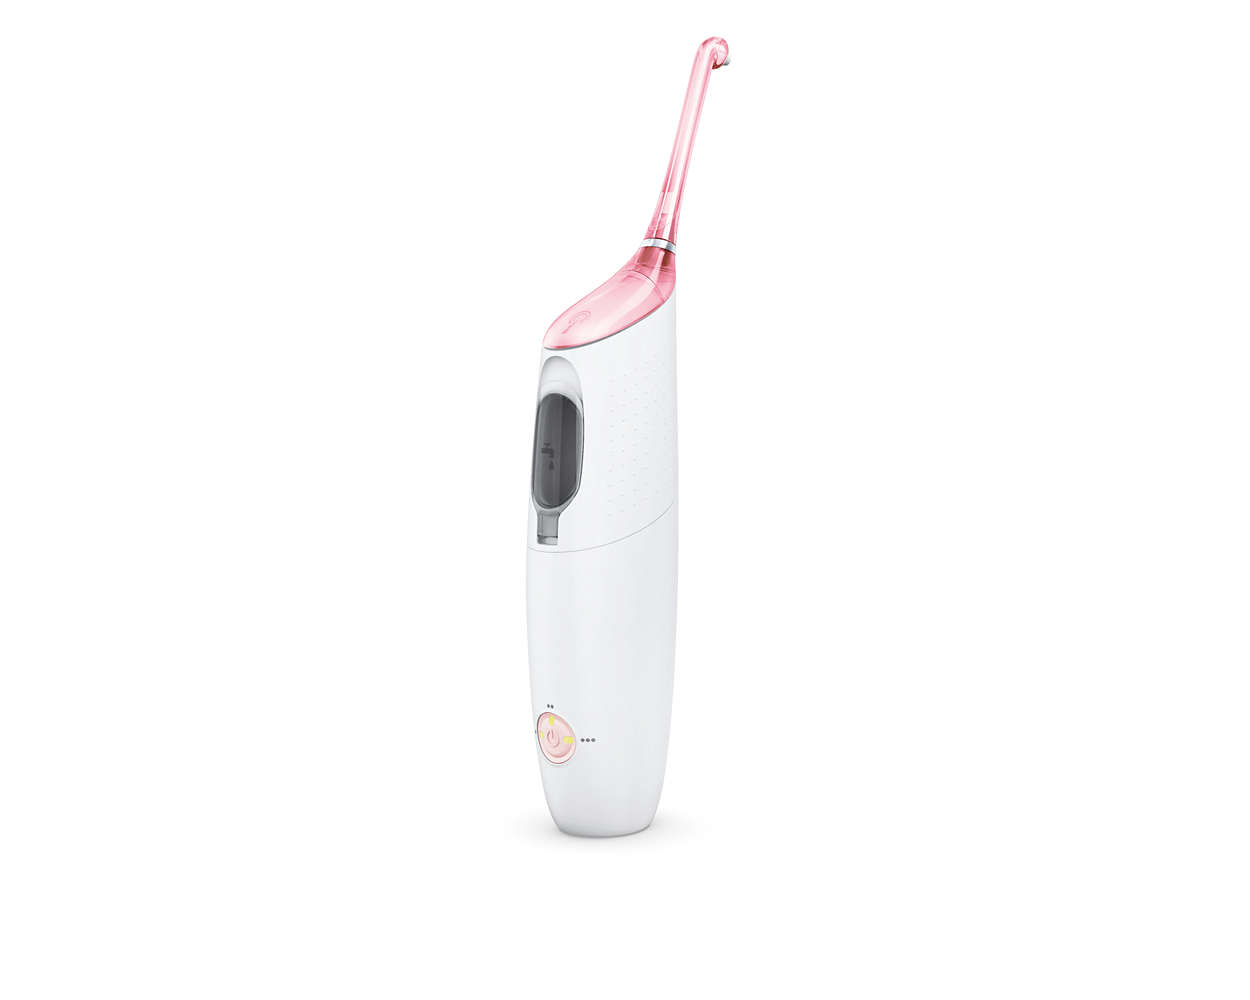 Truce copper Mention AirFloss Pro/Ultra - Interdental cleaner HX8331/12 | Sonicare